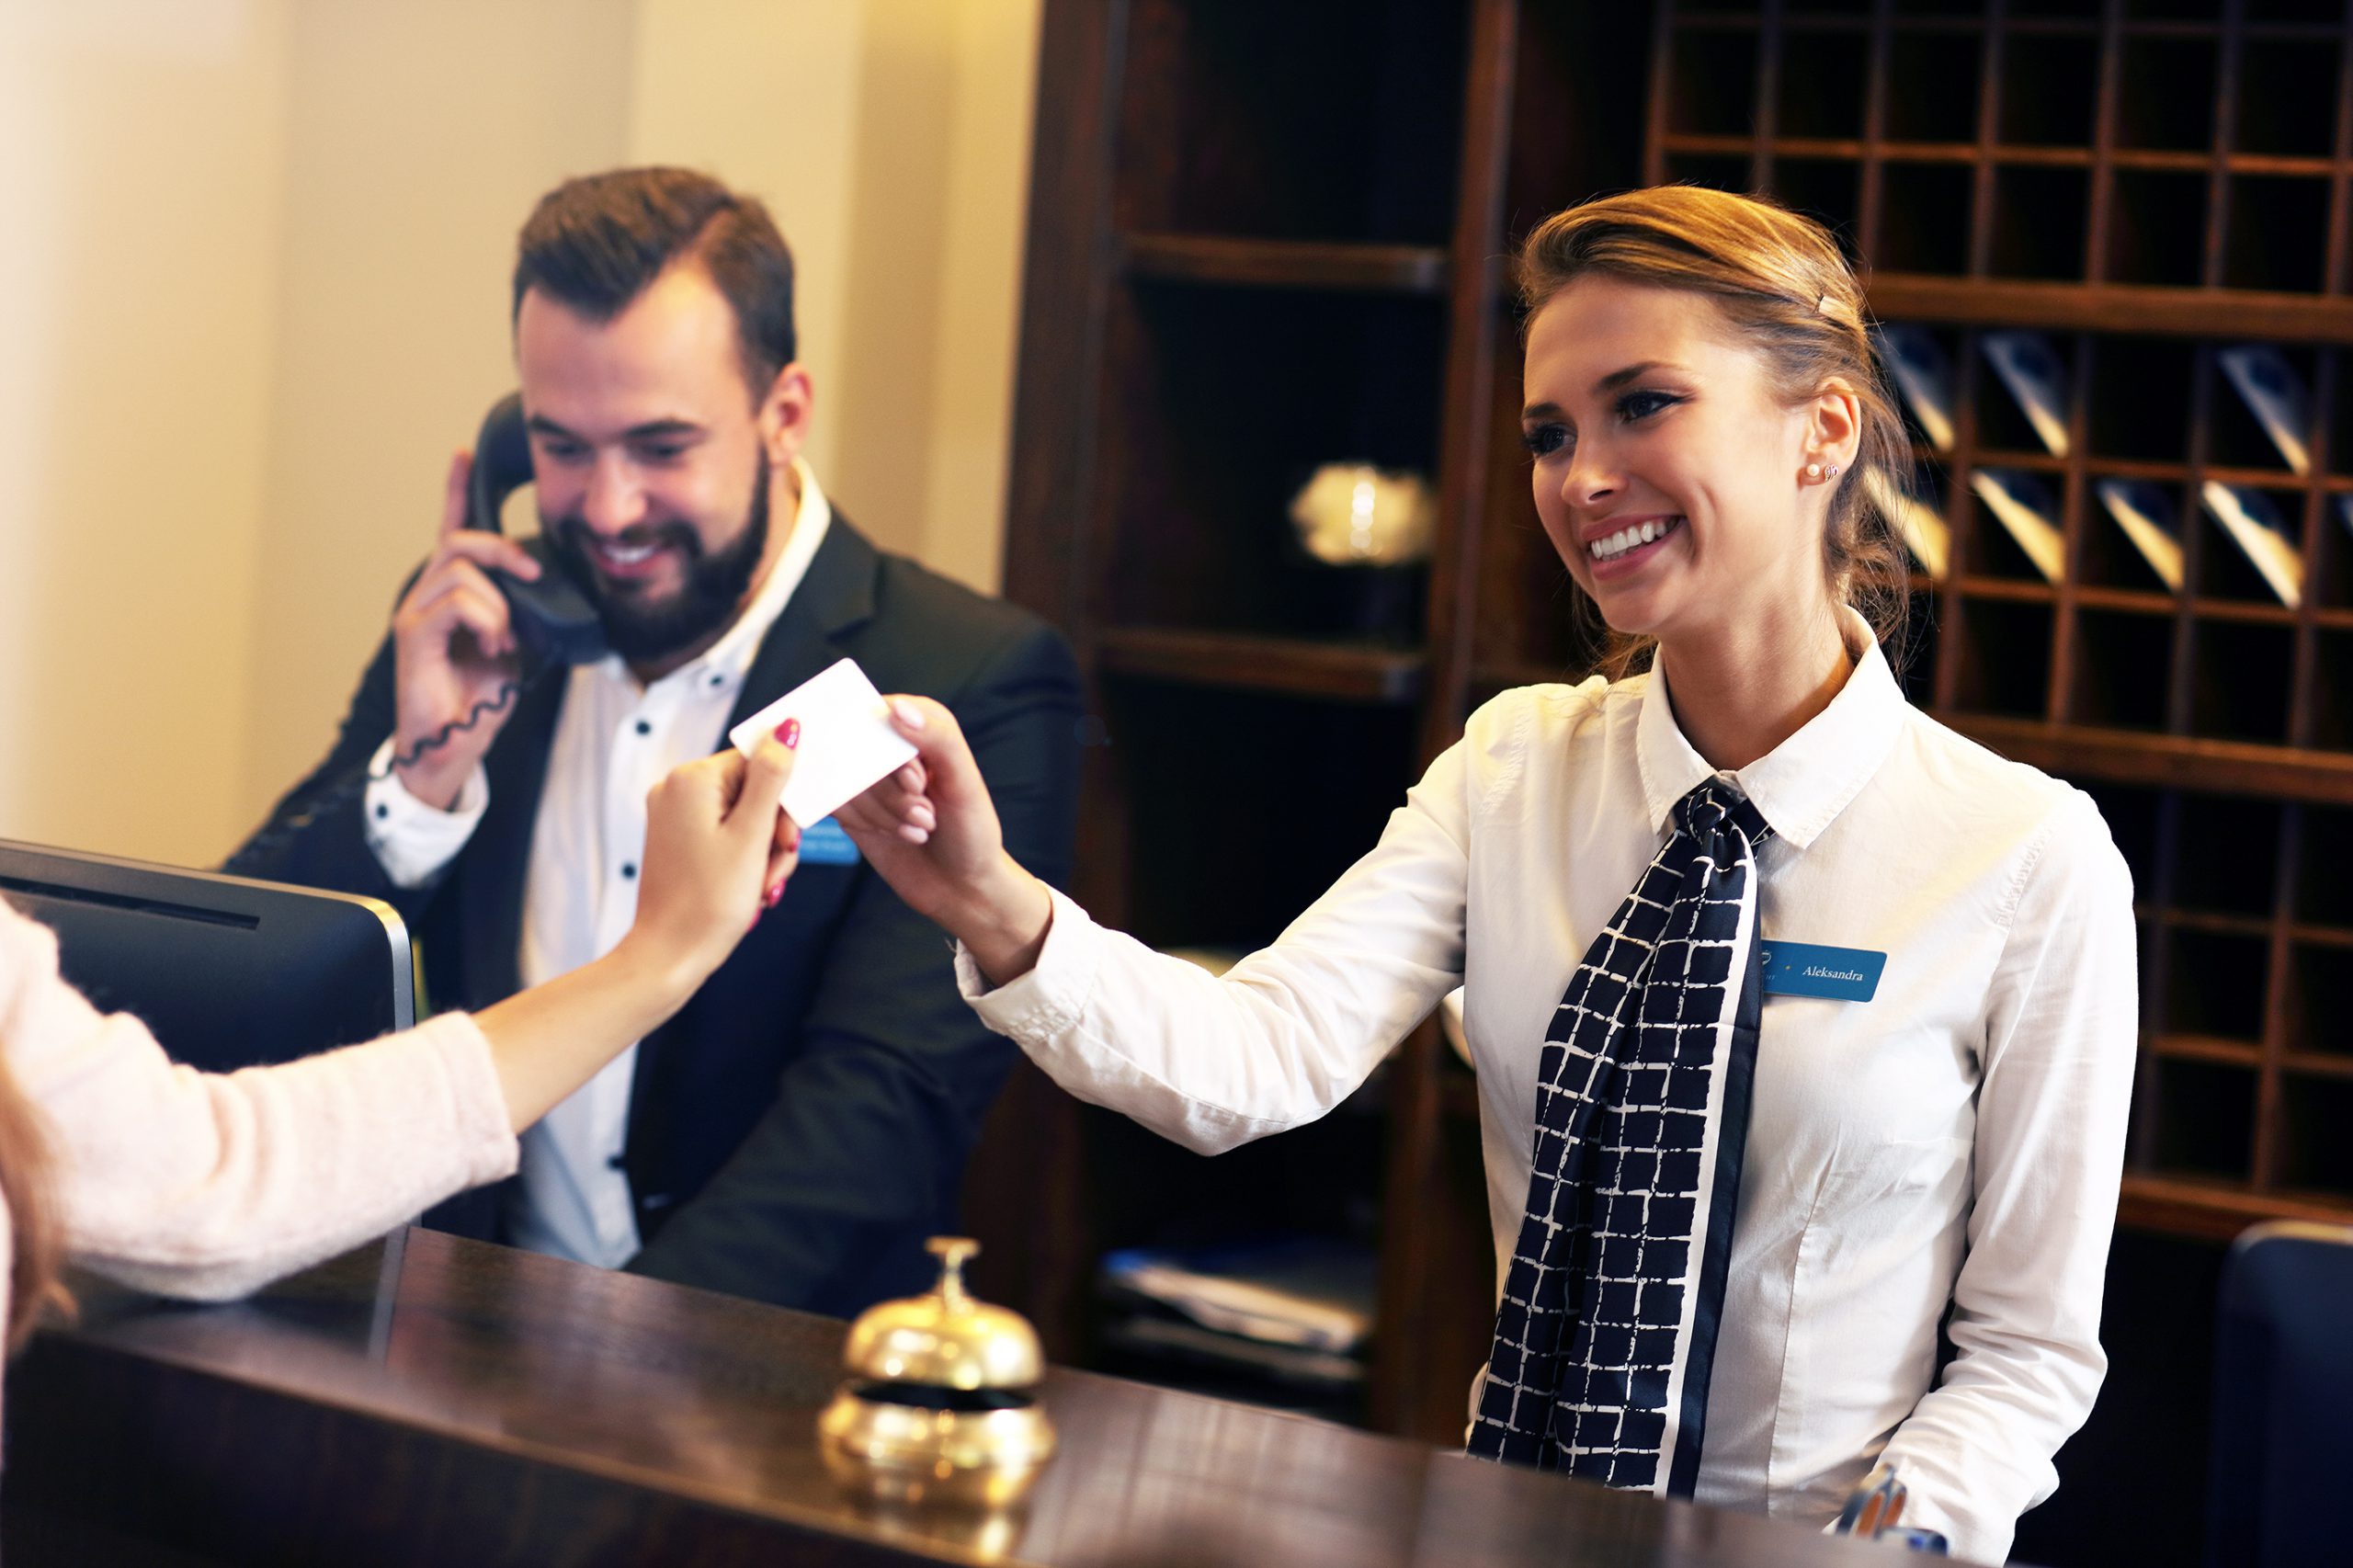 Guests-getting-key-card-in-hotel-640147624_2738x1825